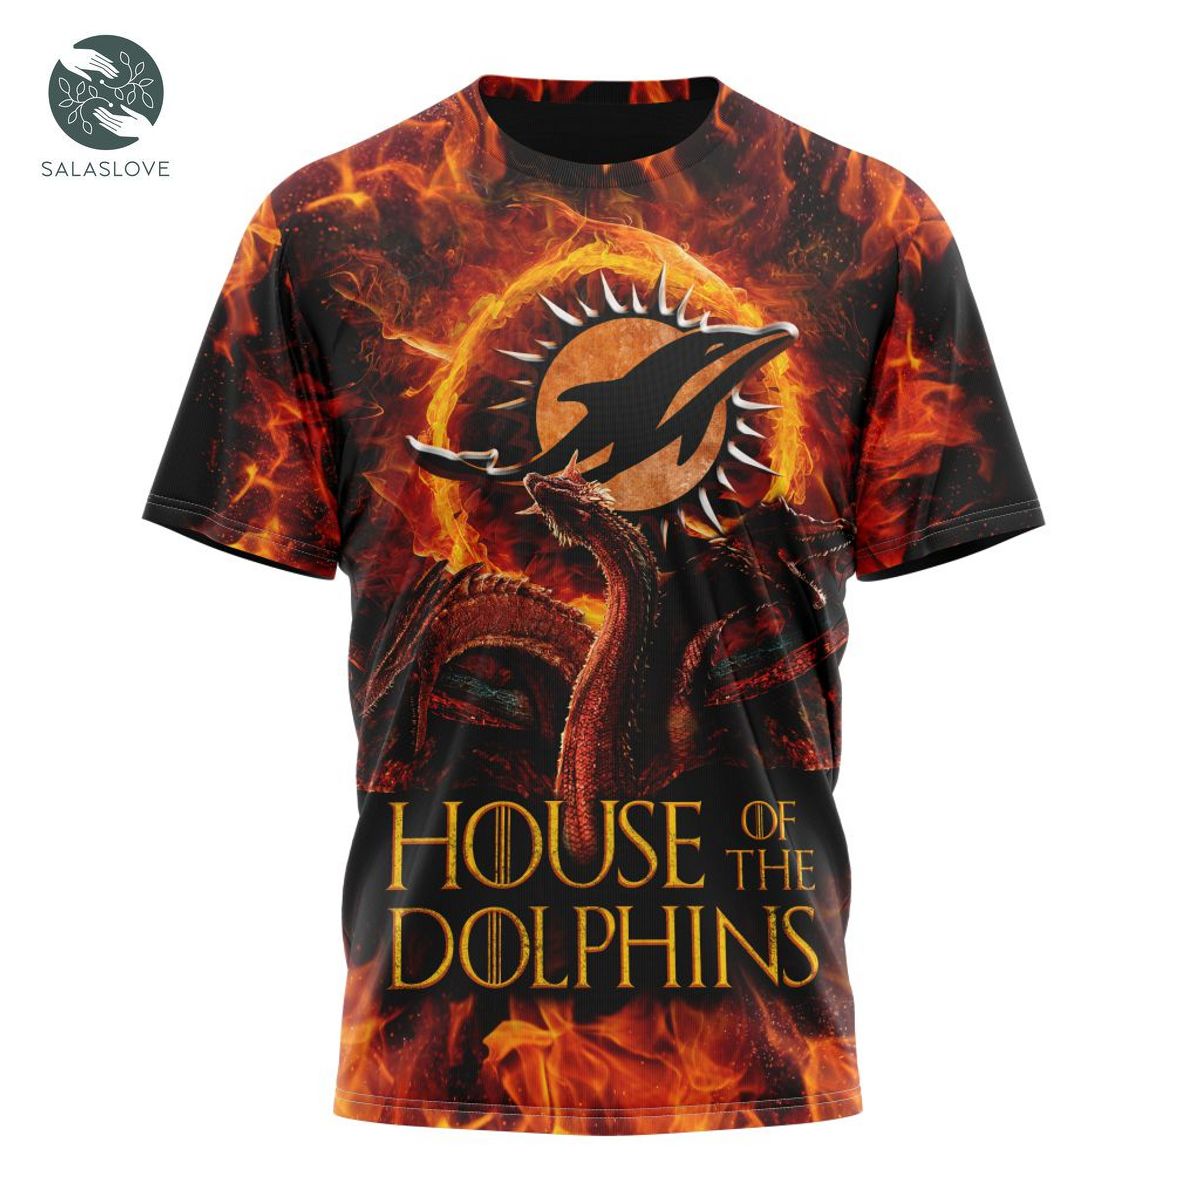 NFL Miami Dolphins GAME OF THRONES – HOUSE OF THE DOLPHINS Shirt